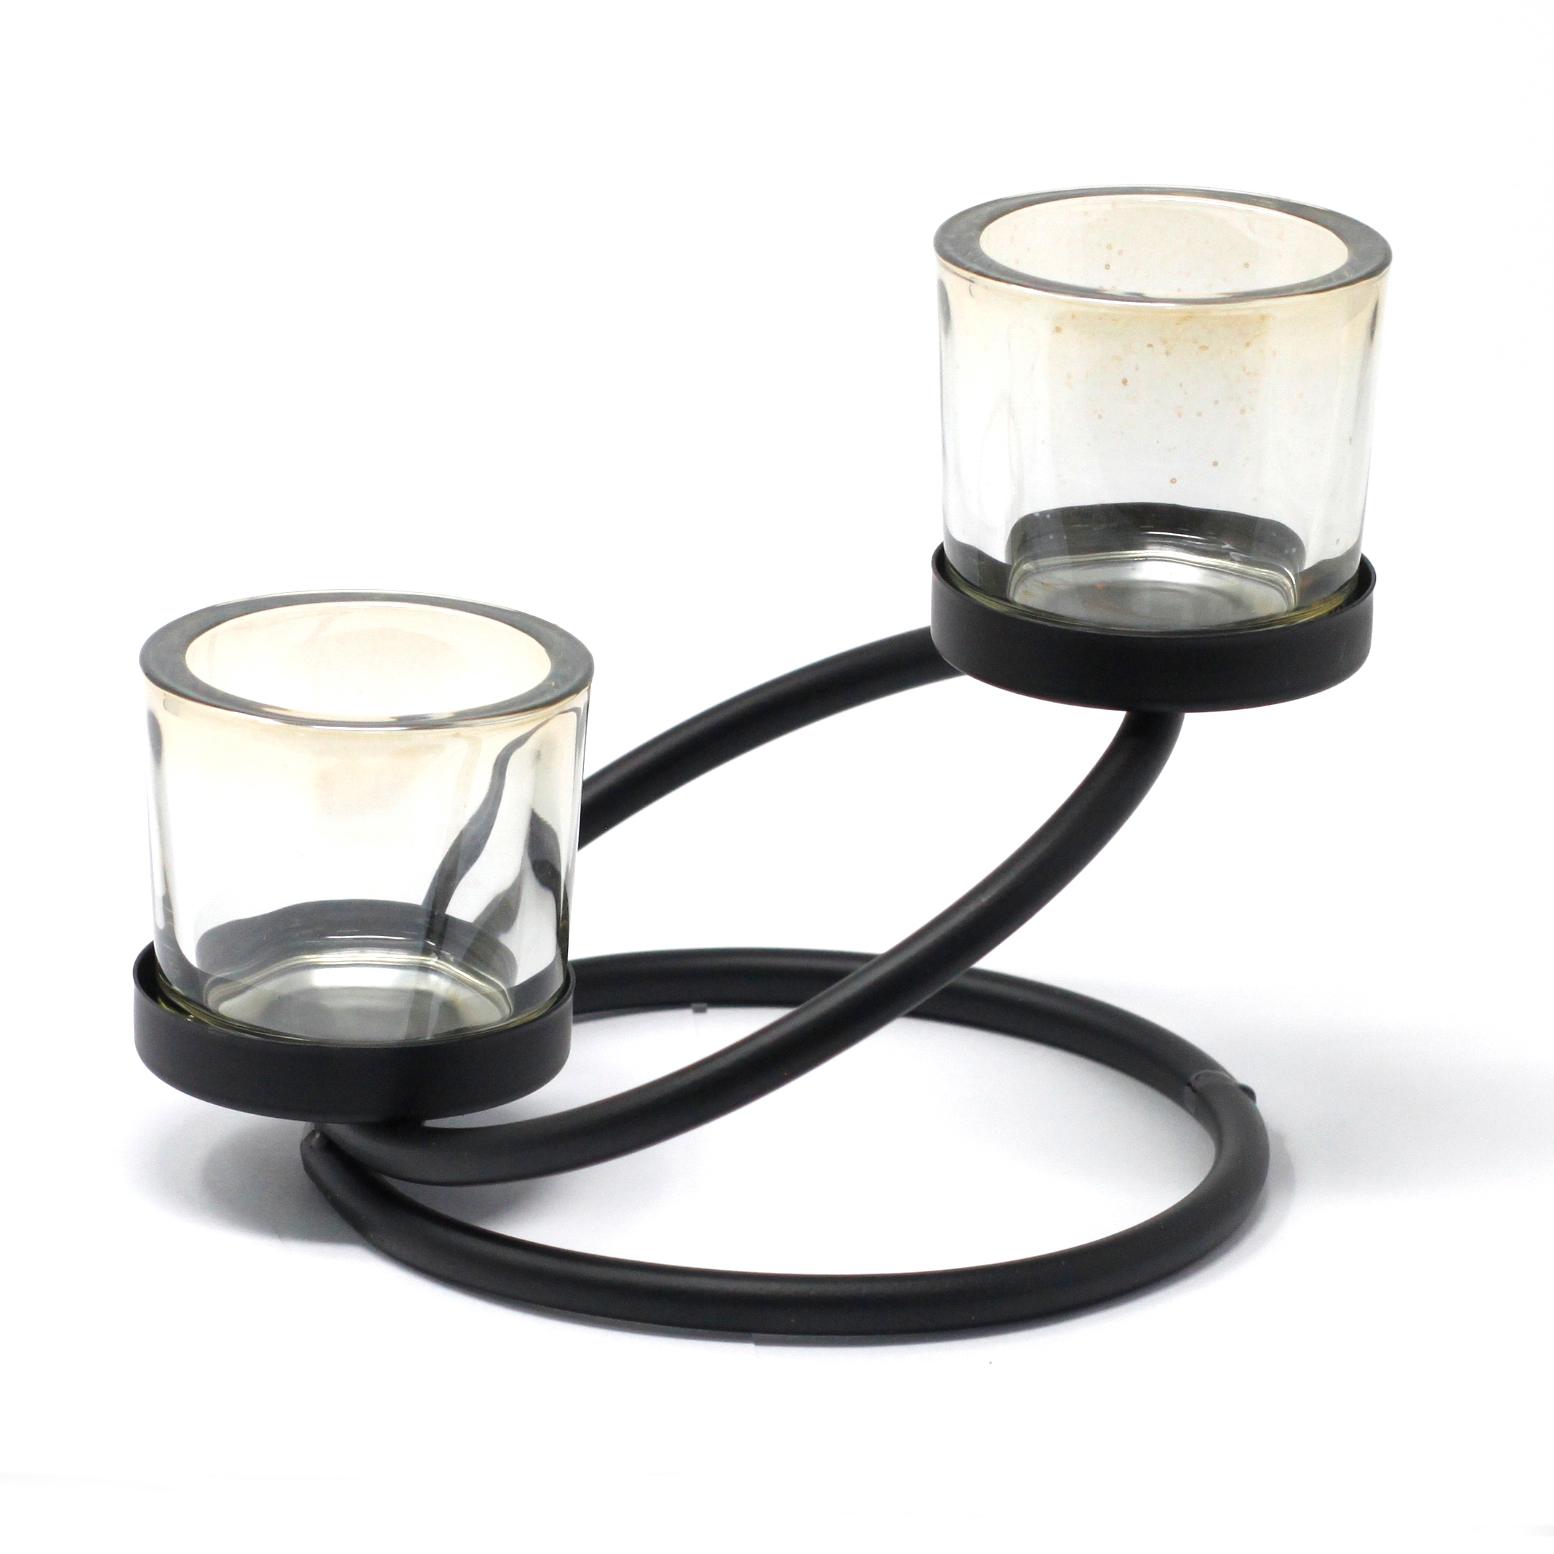 Centrepiece Iron Votive Candle Holder - 2 Cup Triangle